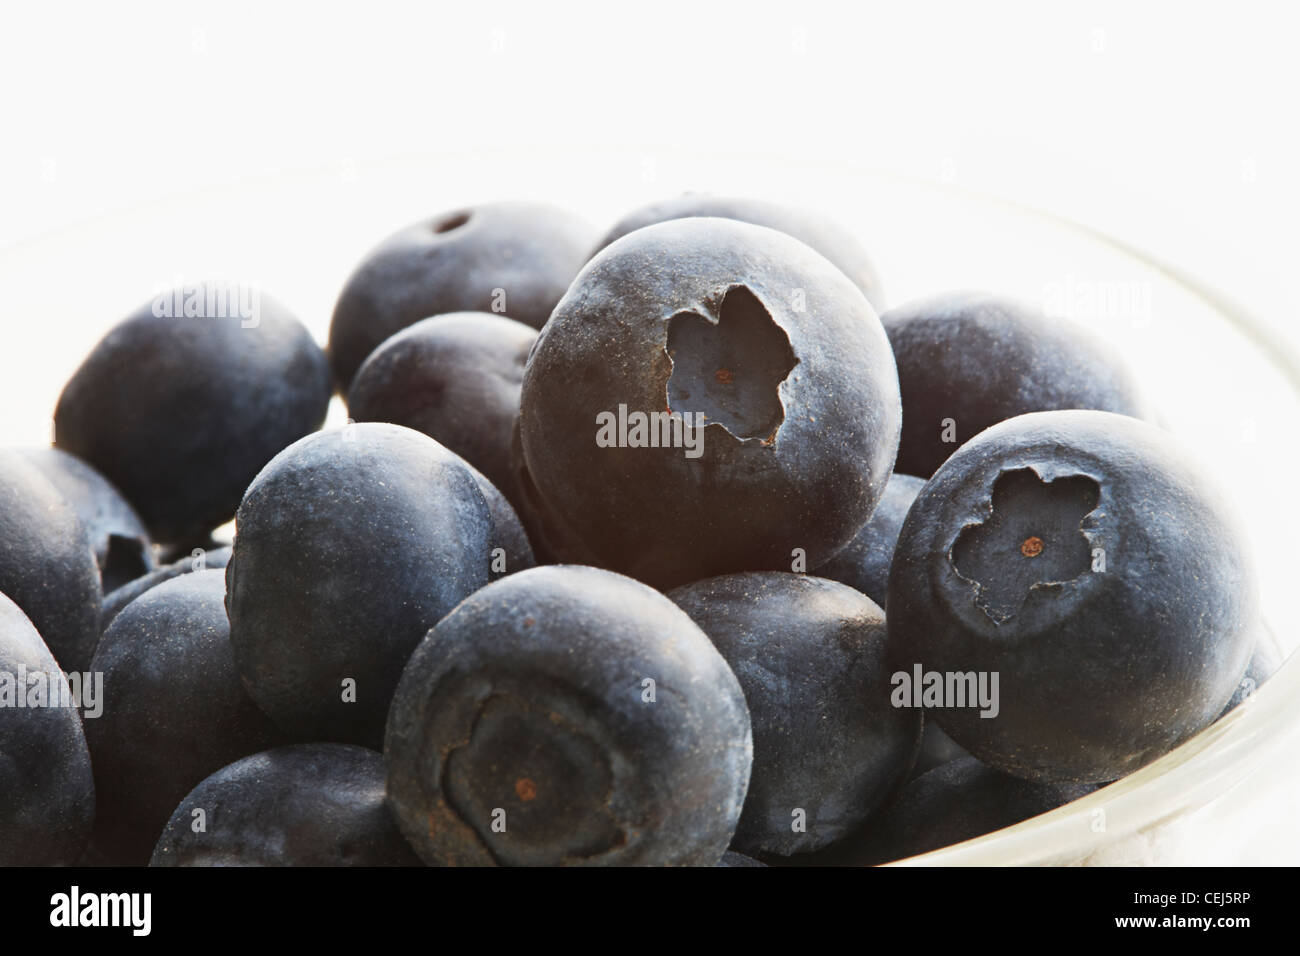 close up of Blueberries in a glass bowl Stock Photo